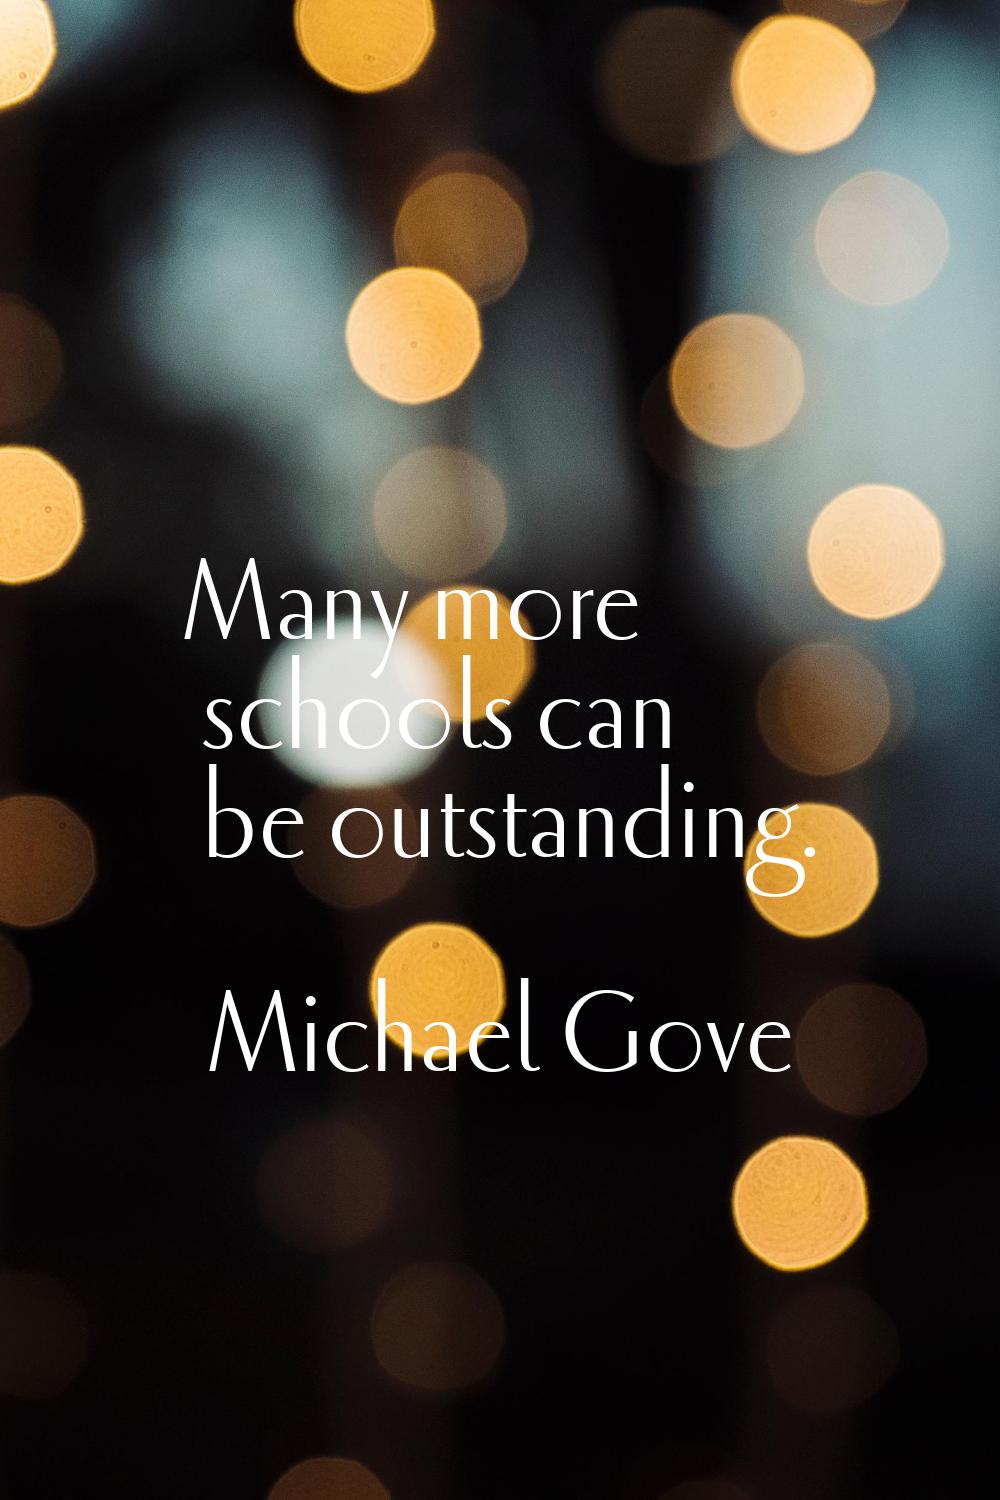 Many more schools can be outstanding.